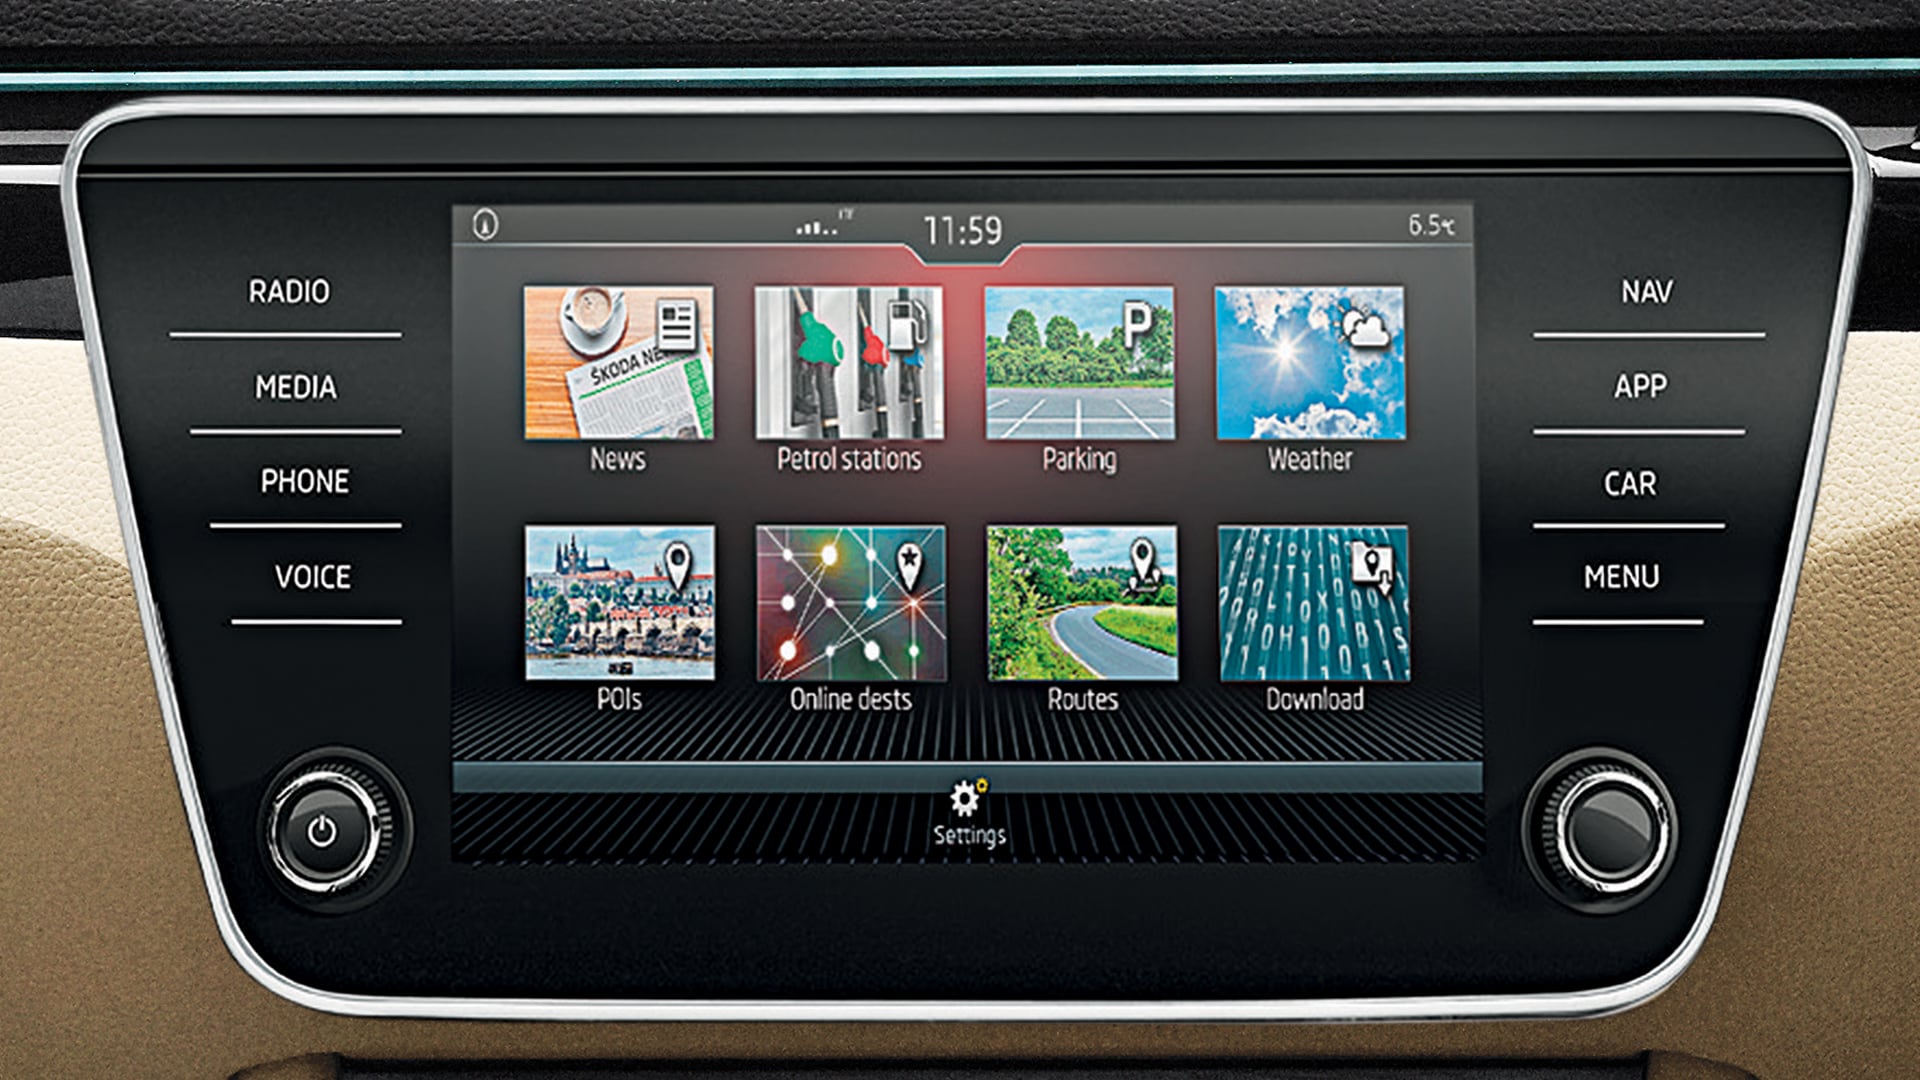 The Skoda Superb gets an 8-inch infotainment screen in the cabin.